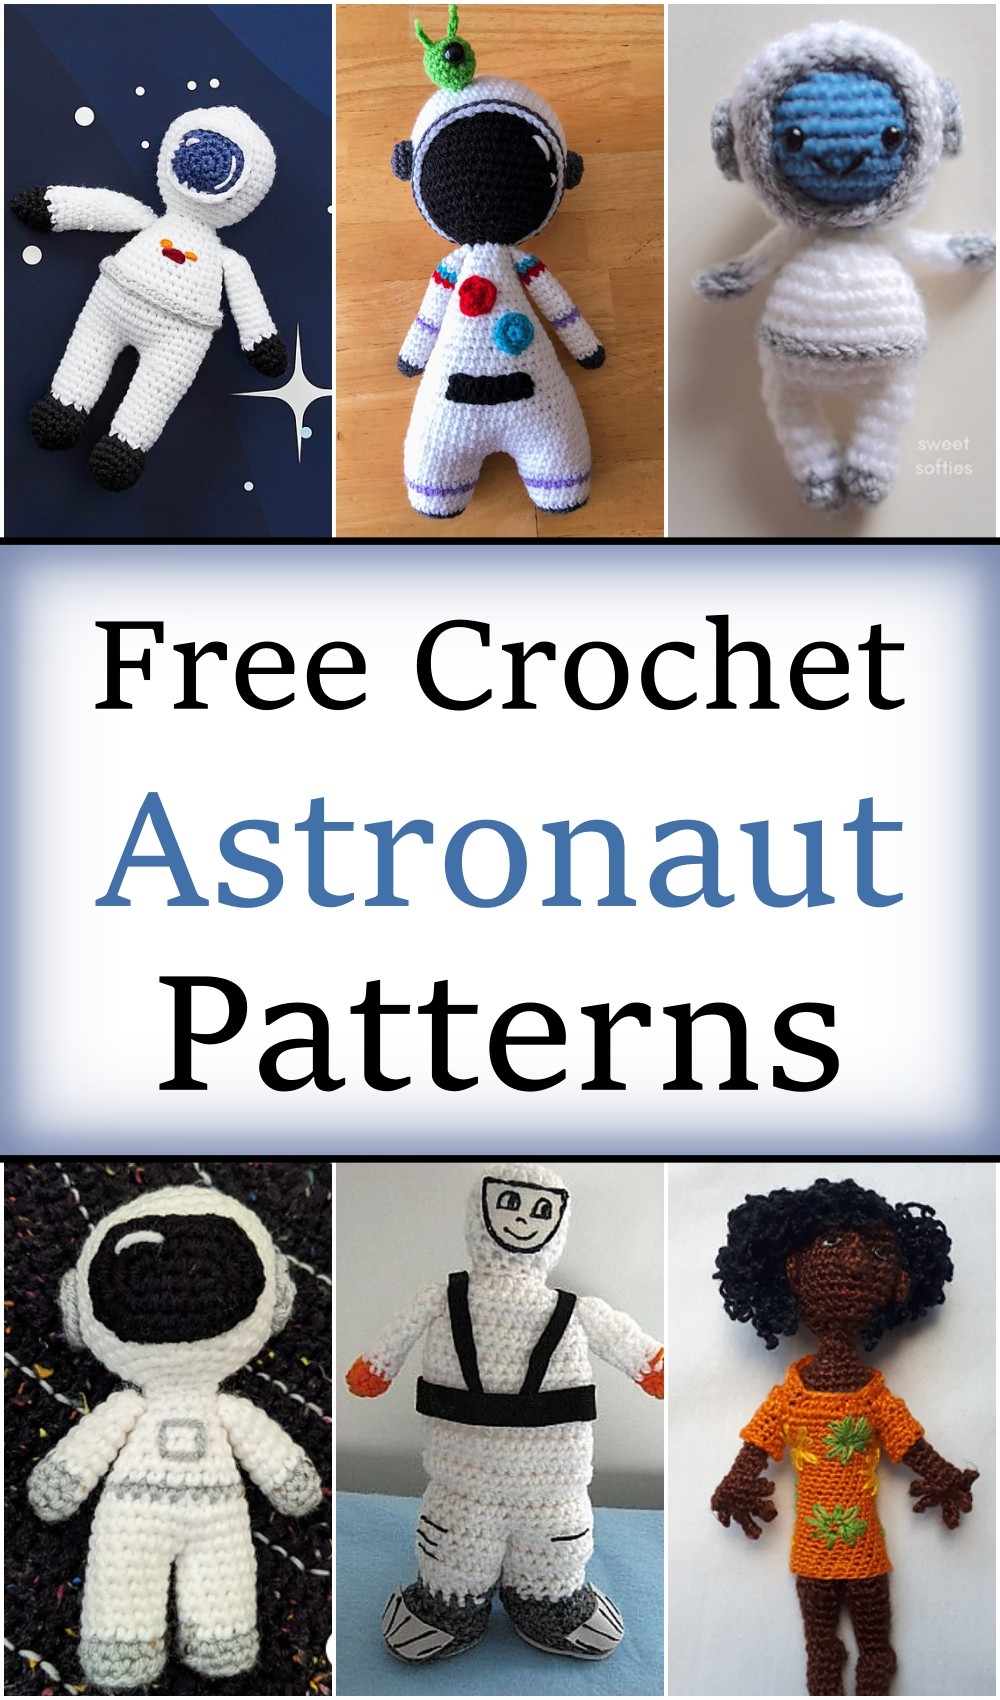 Free Crochet Astronaut Patterns For All Skill Levels 